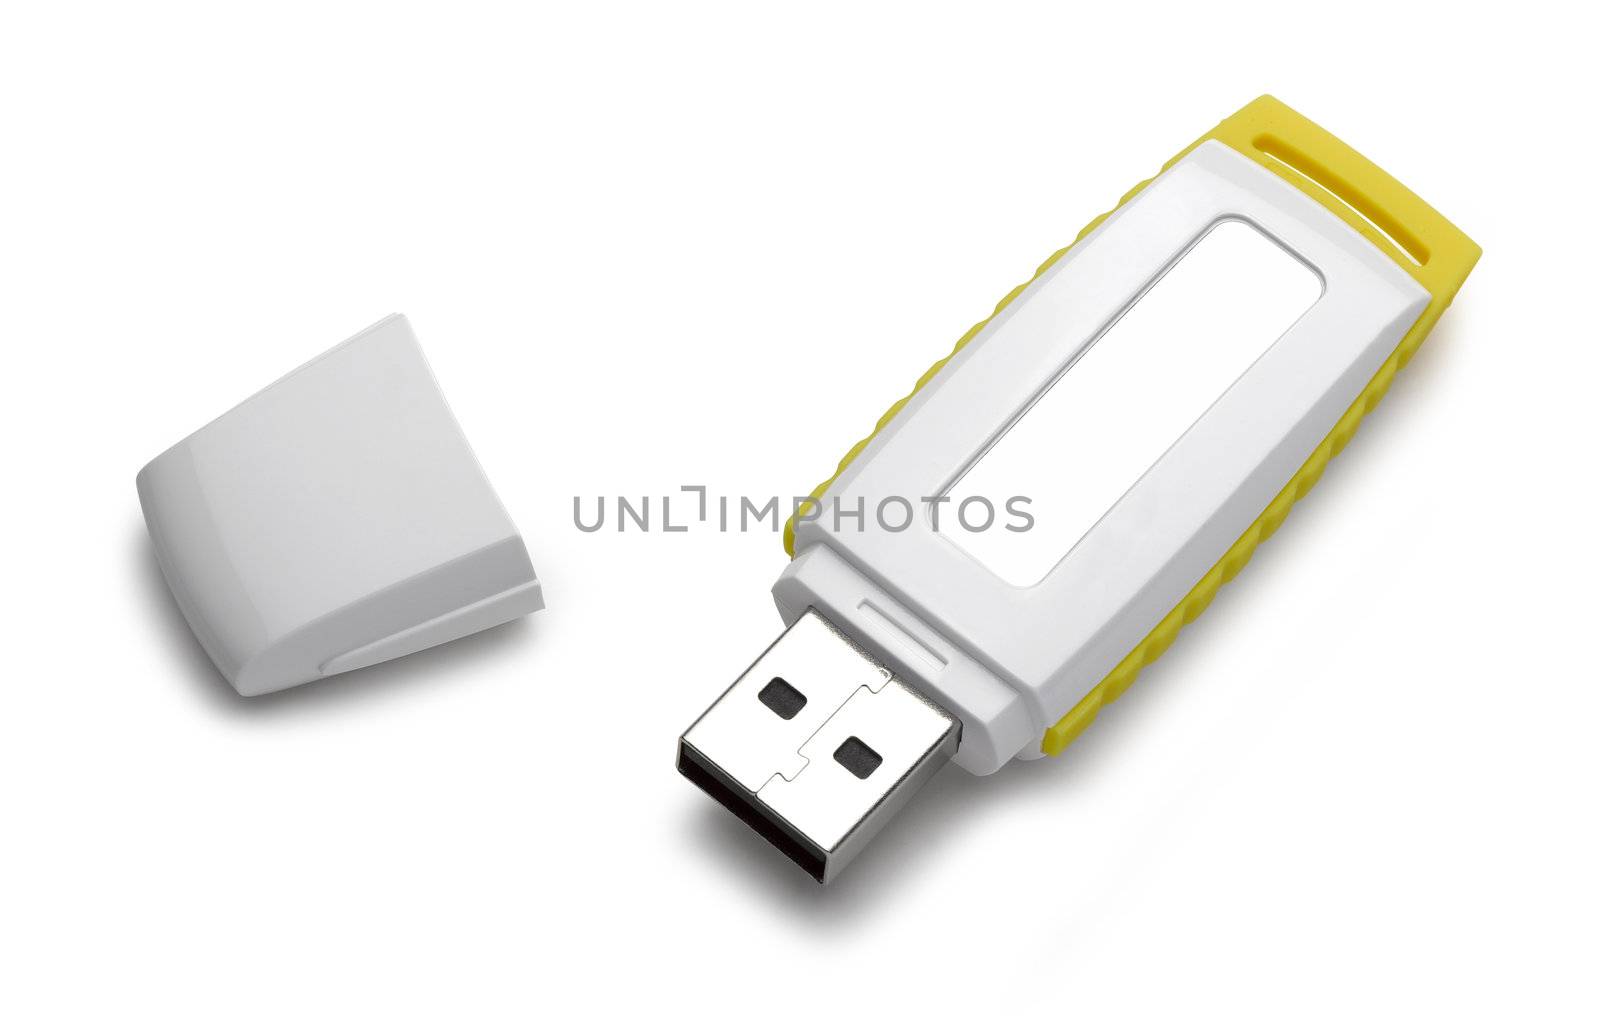 Usb flash memory isolated on the white background with Clipping Path. High Quality XXXL